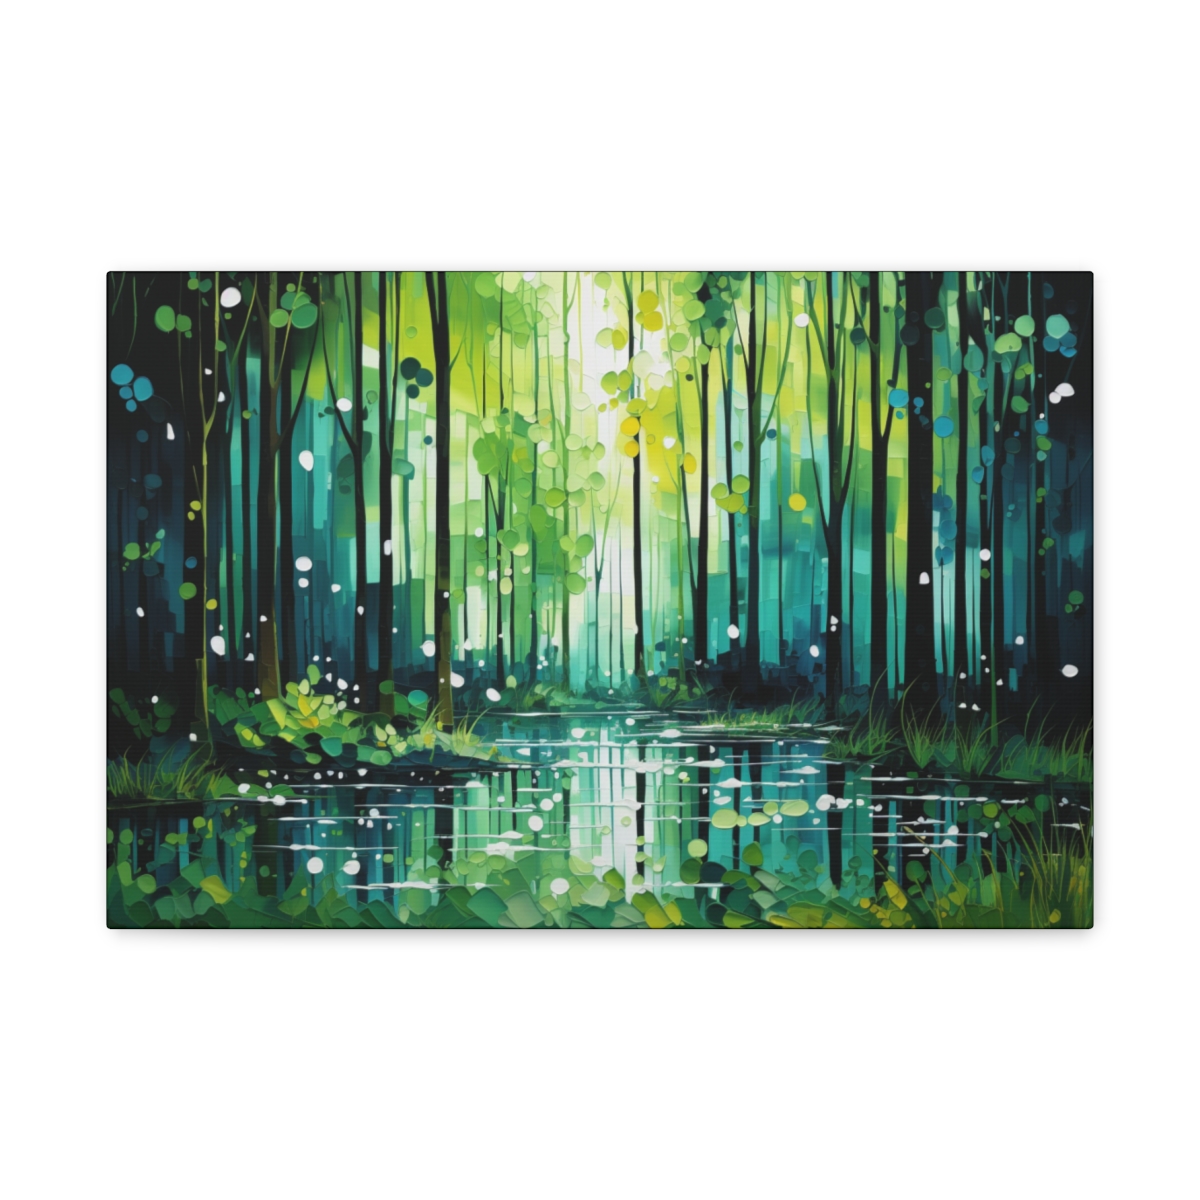 Forest Art Canvas Print: Solitude Among Trees